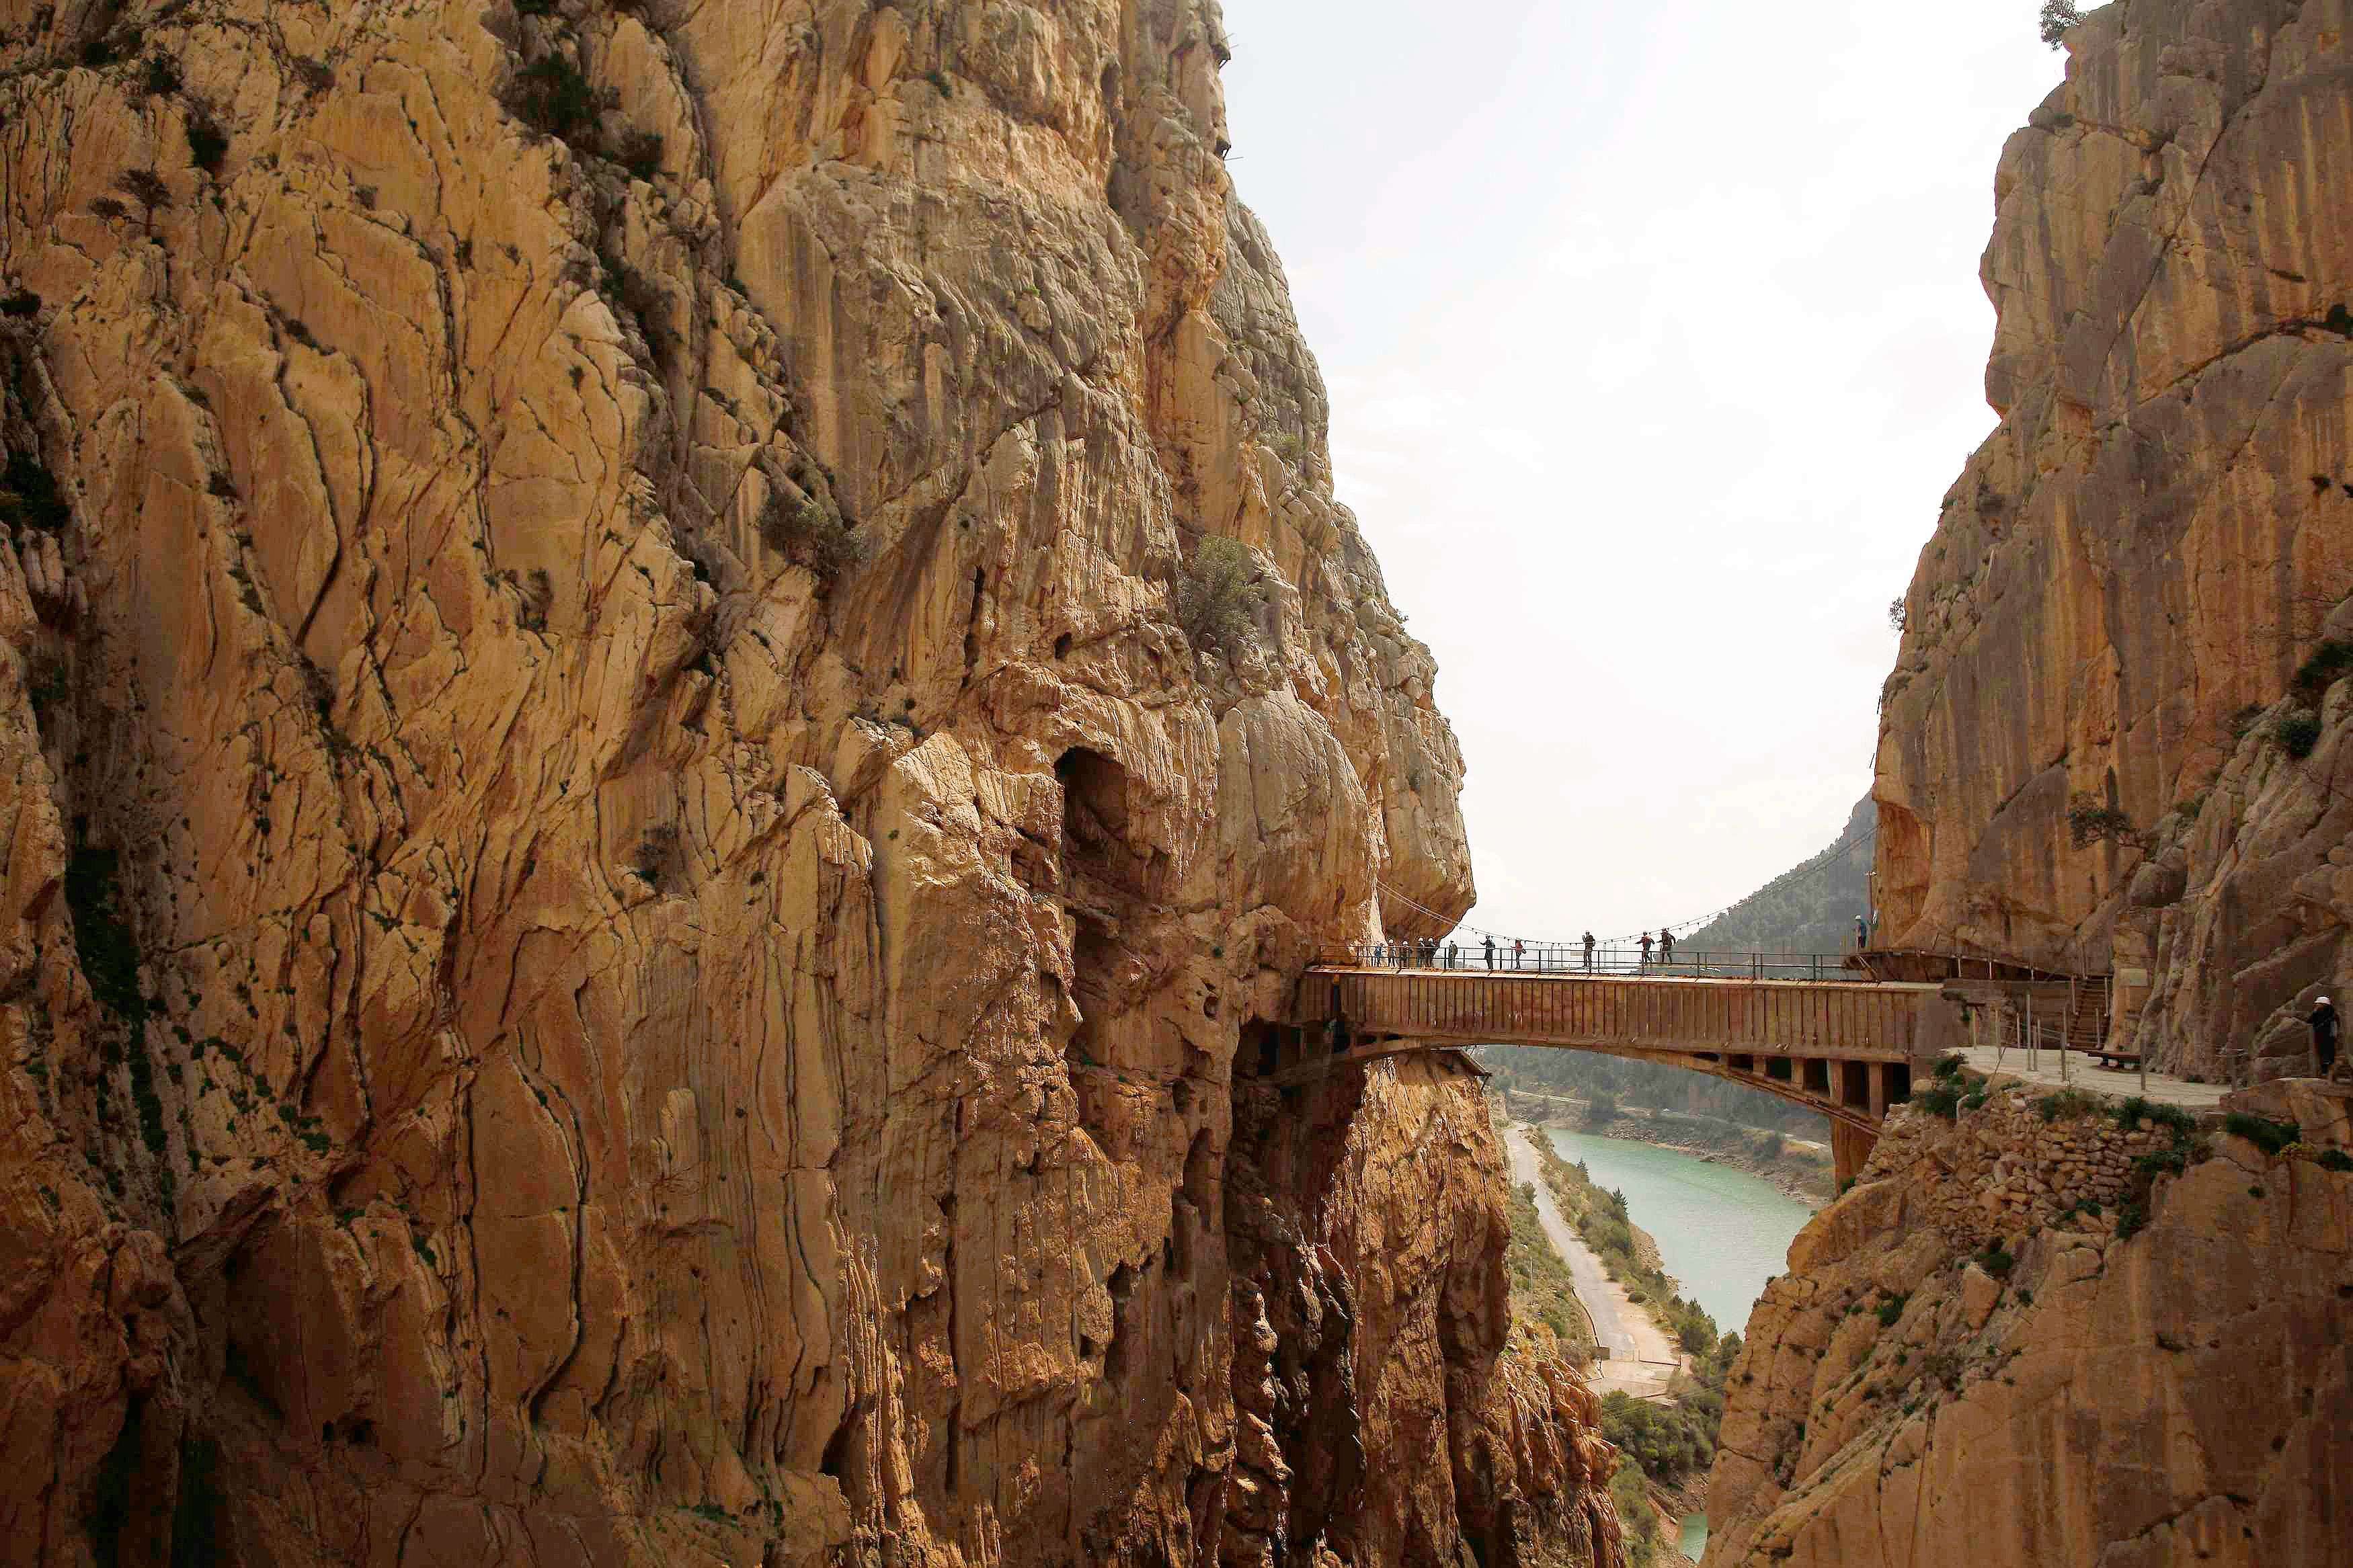 Journalists walk along the new Caminito del Rey (The King's little pathway) in El Chorro-Alora